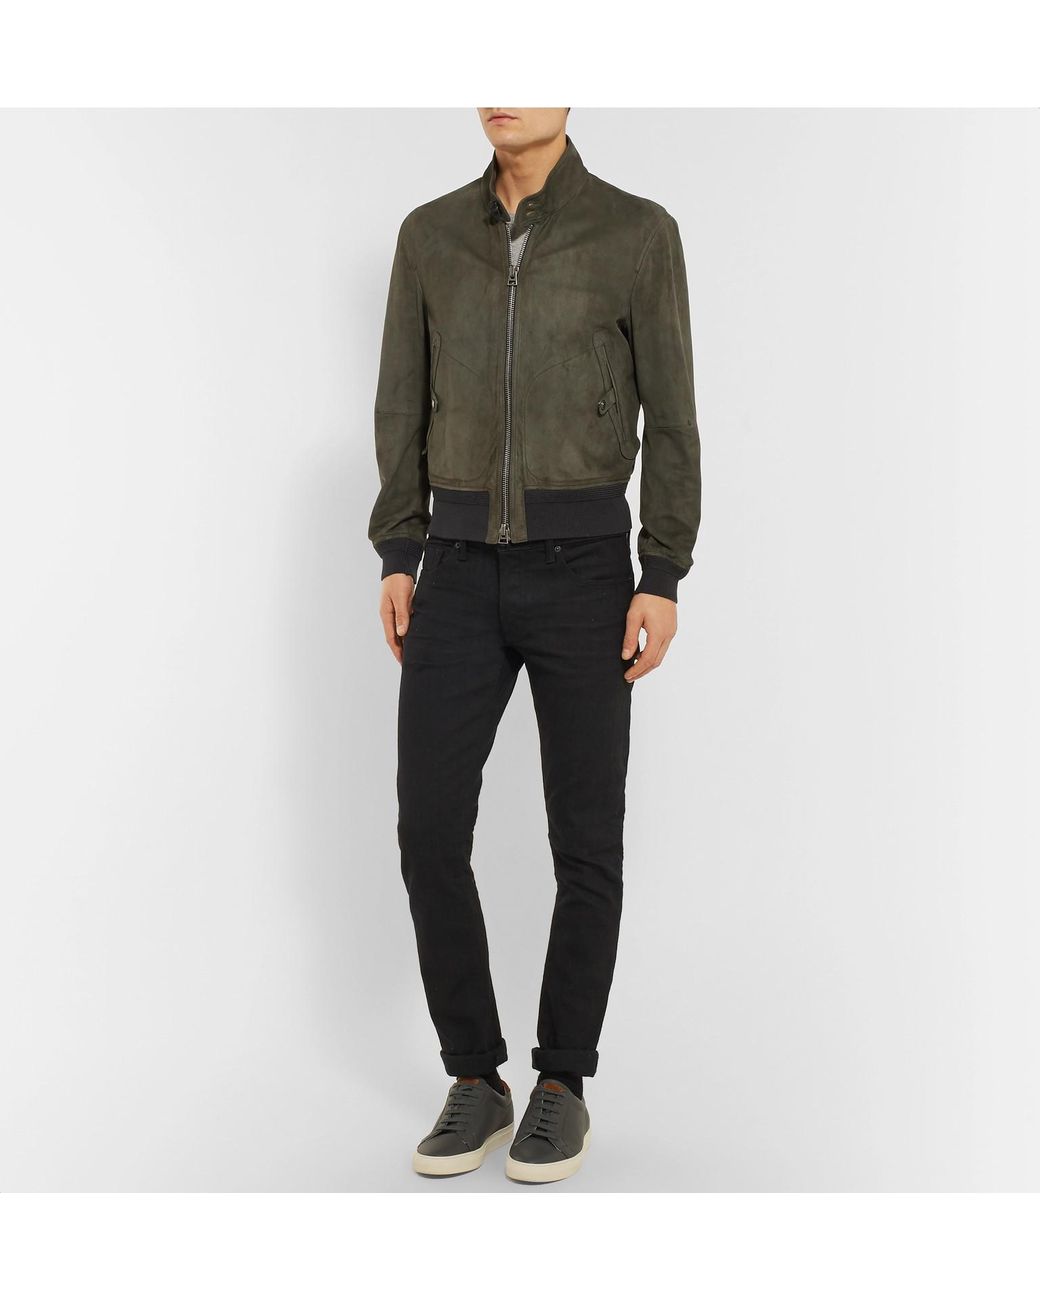 Tom Ford Slim-fit Suede Harrington Jacket in Green for Men | Lyst Canada